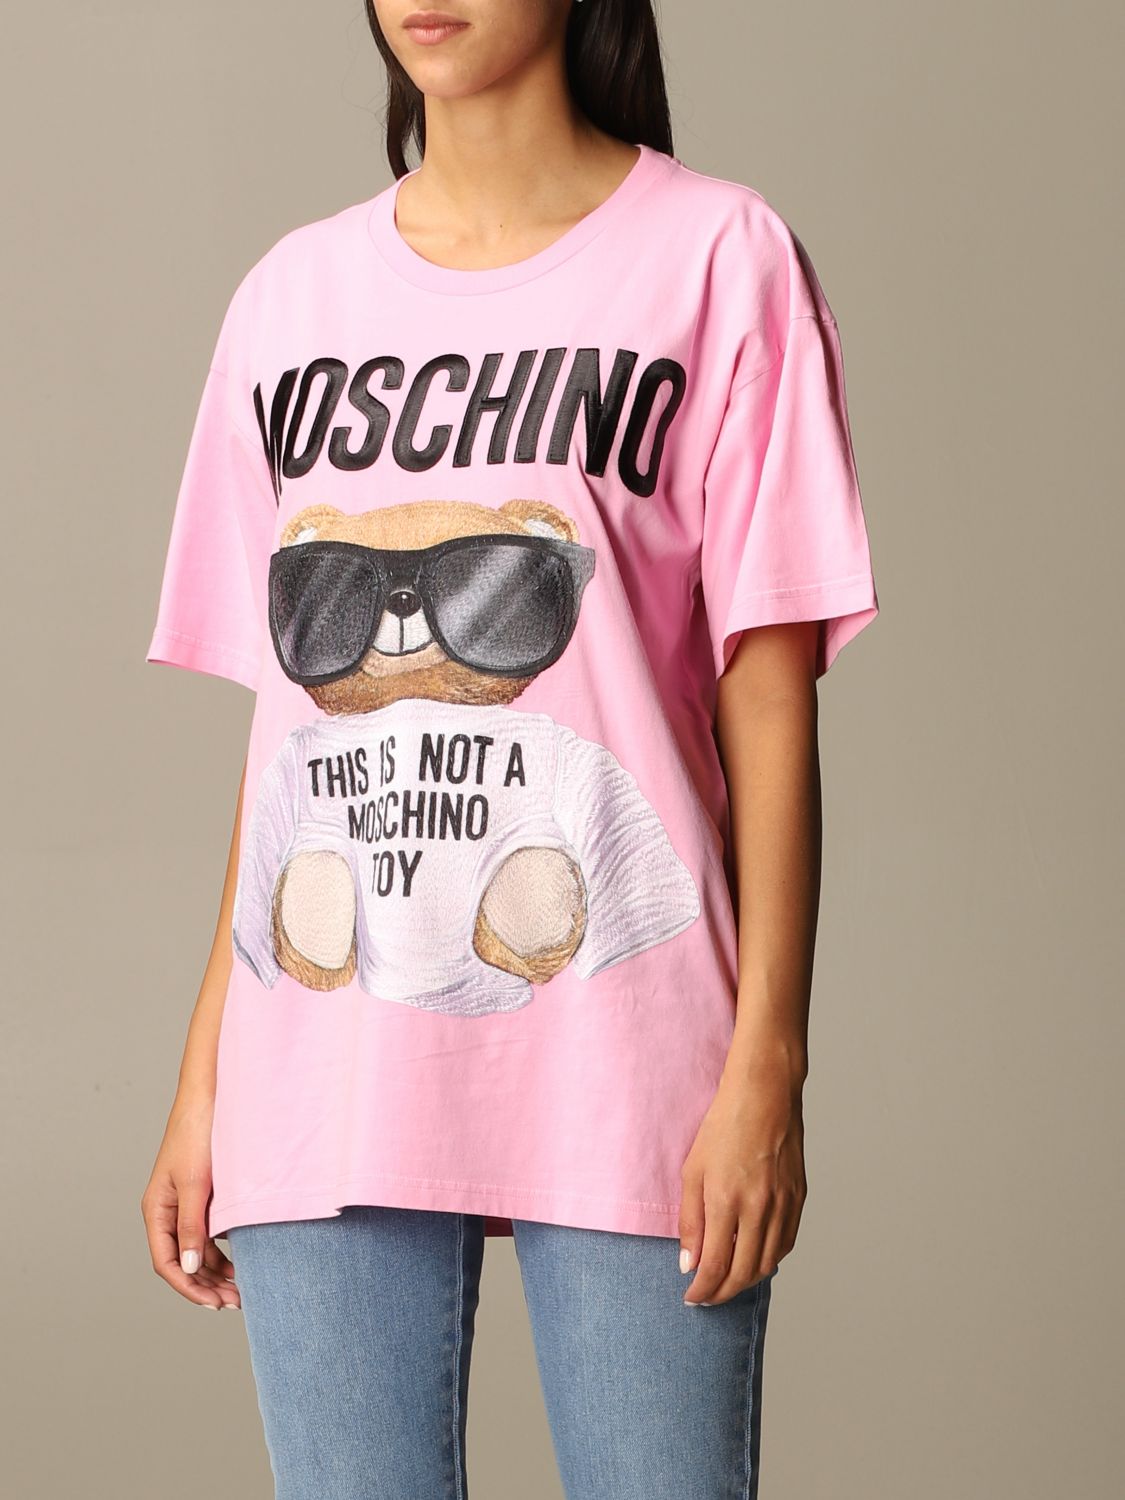 Moschino Coutureアウトレット：Tシャツ レディース - ピンク | GIGLIO